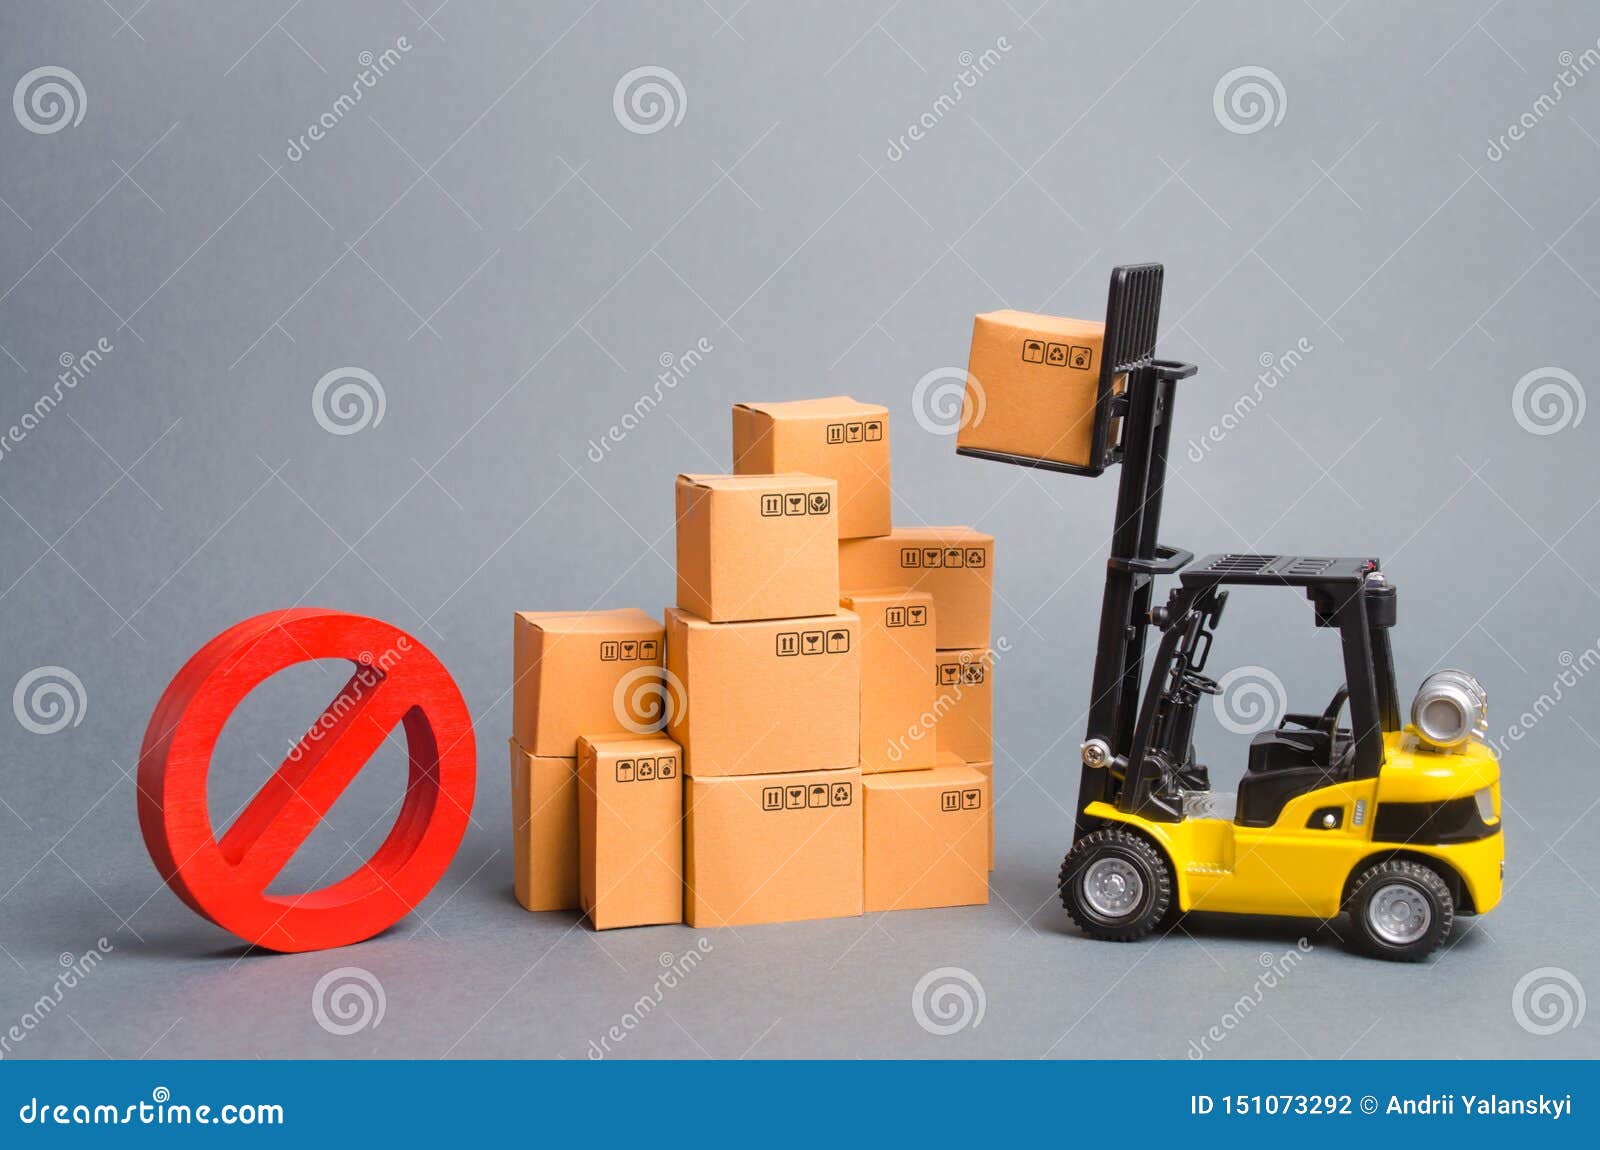 yellow forklift truck truckraises a box over a stack of boxes and a red  no. embargo trade wars. restriction on importation